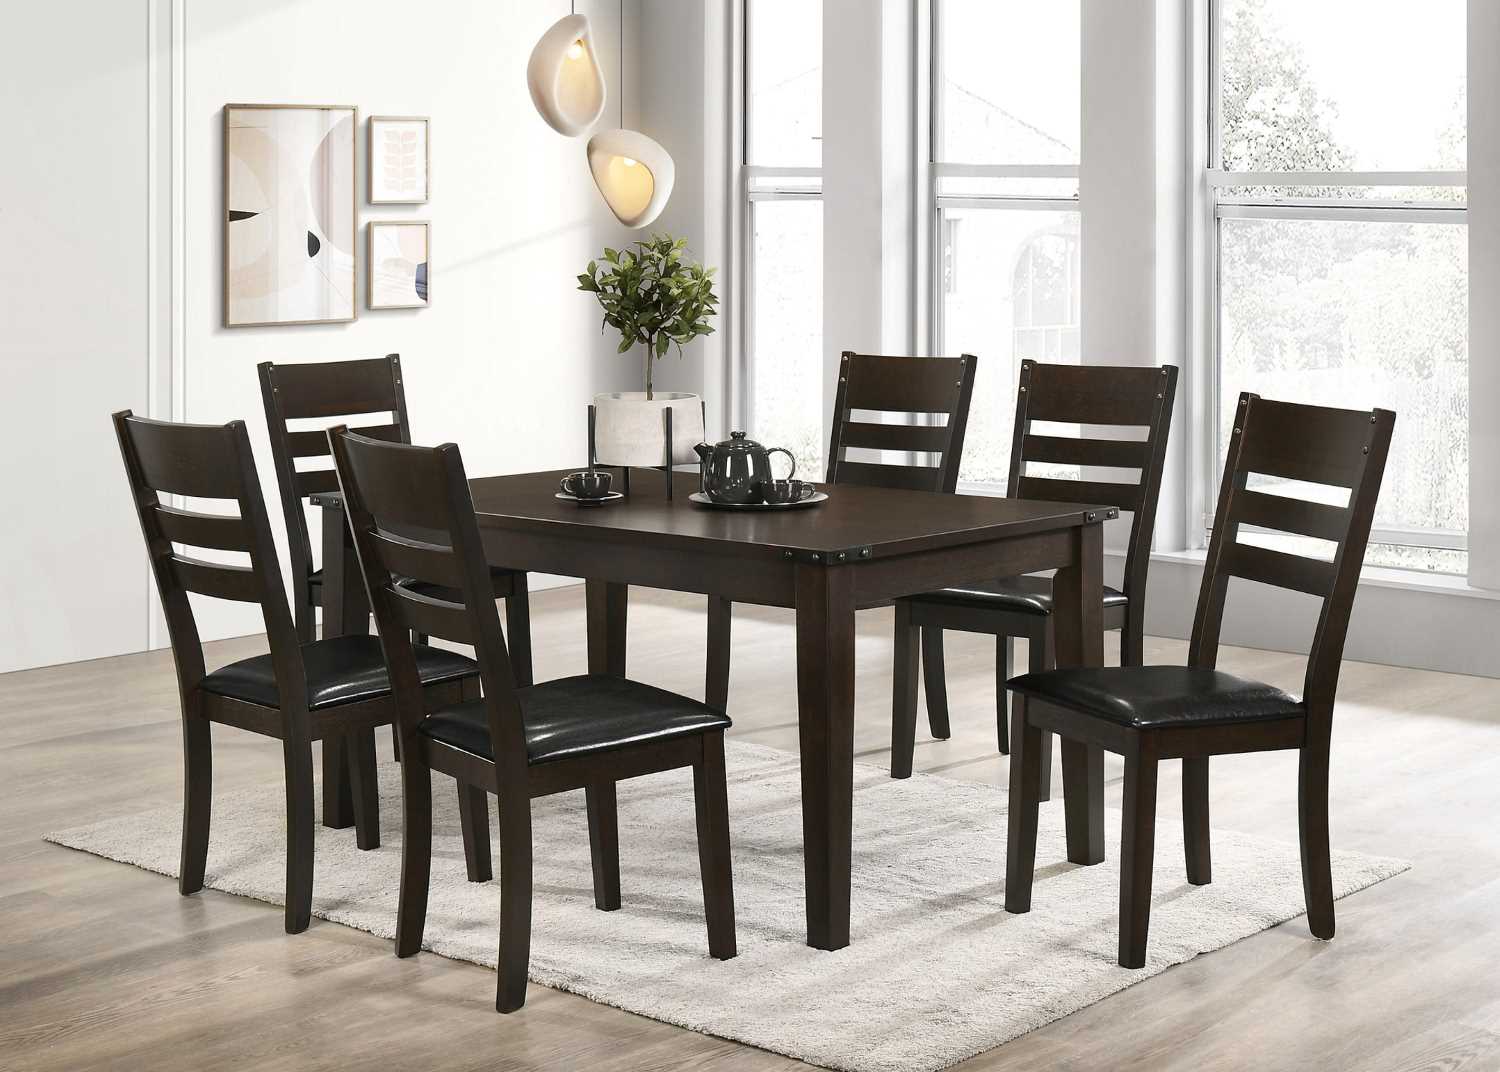 Dining Collection Espresso T-1090 / C-1091